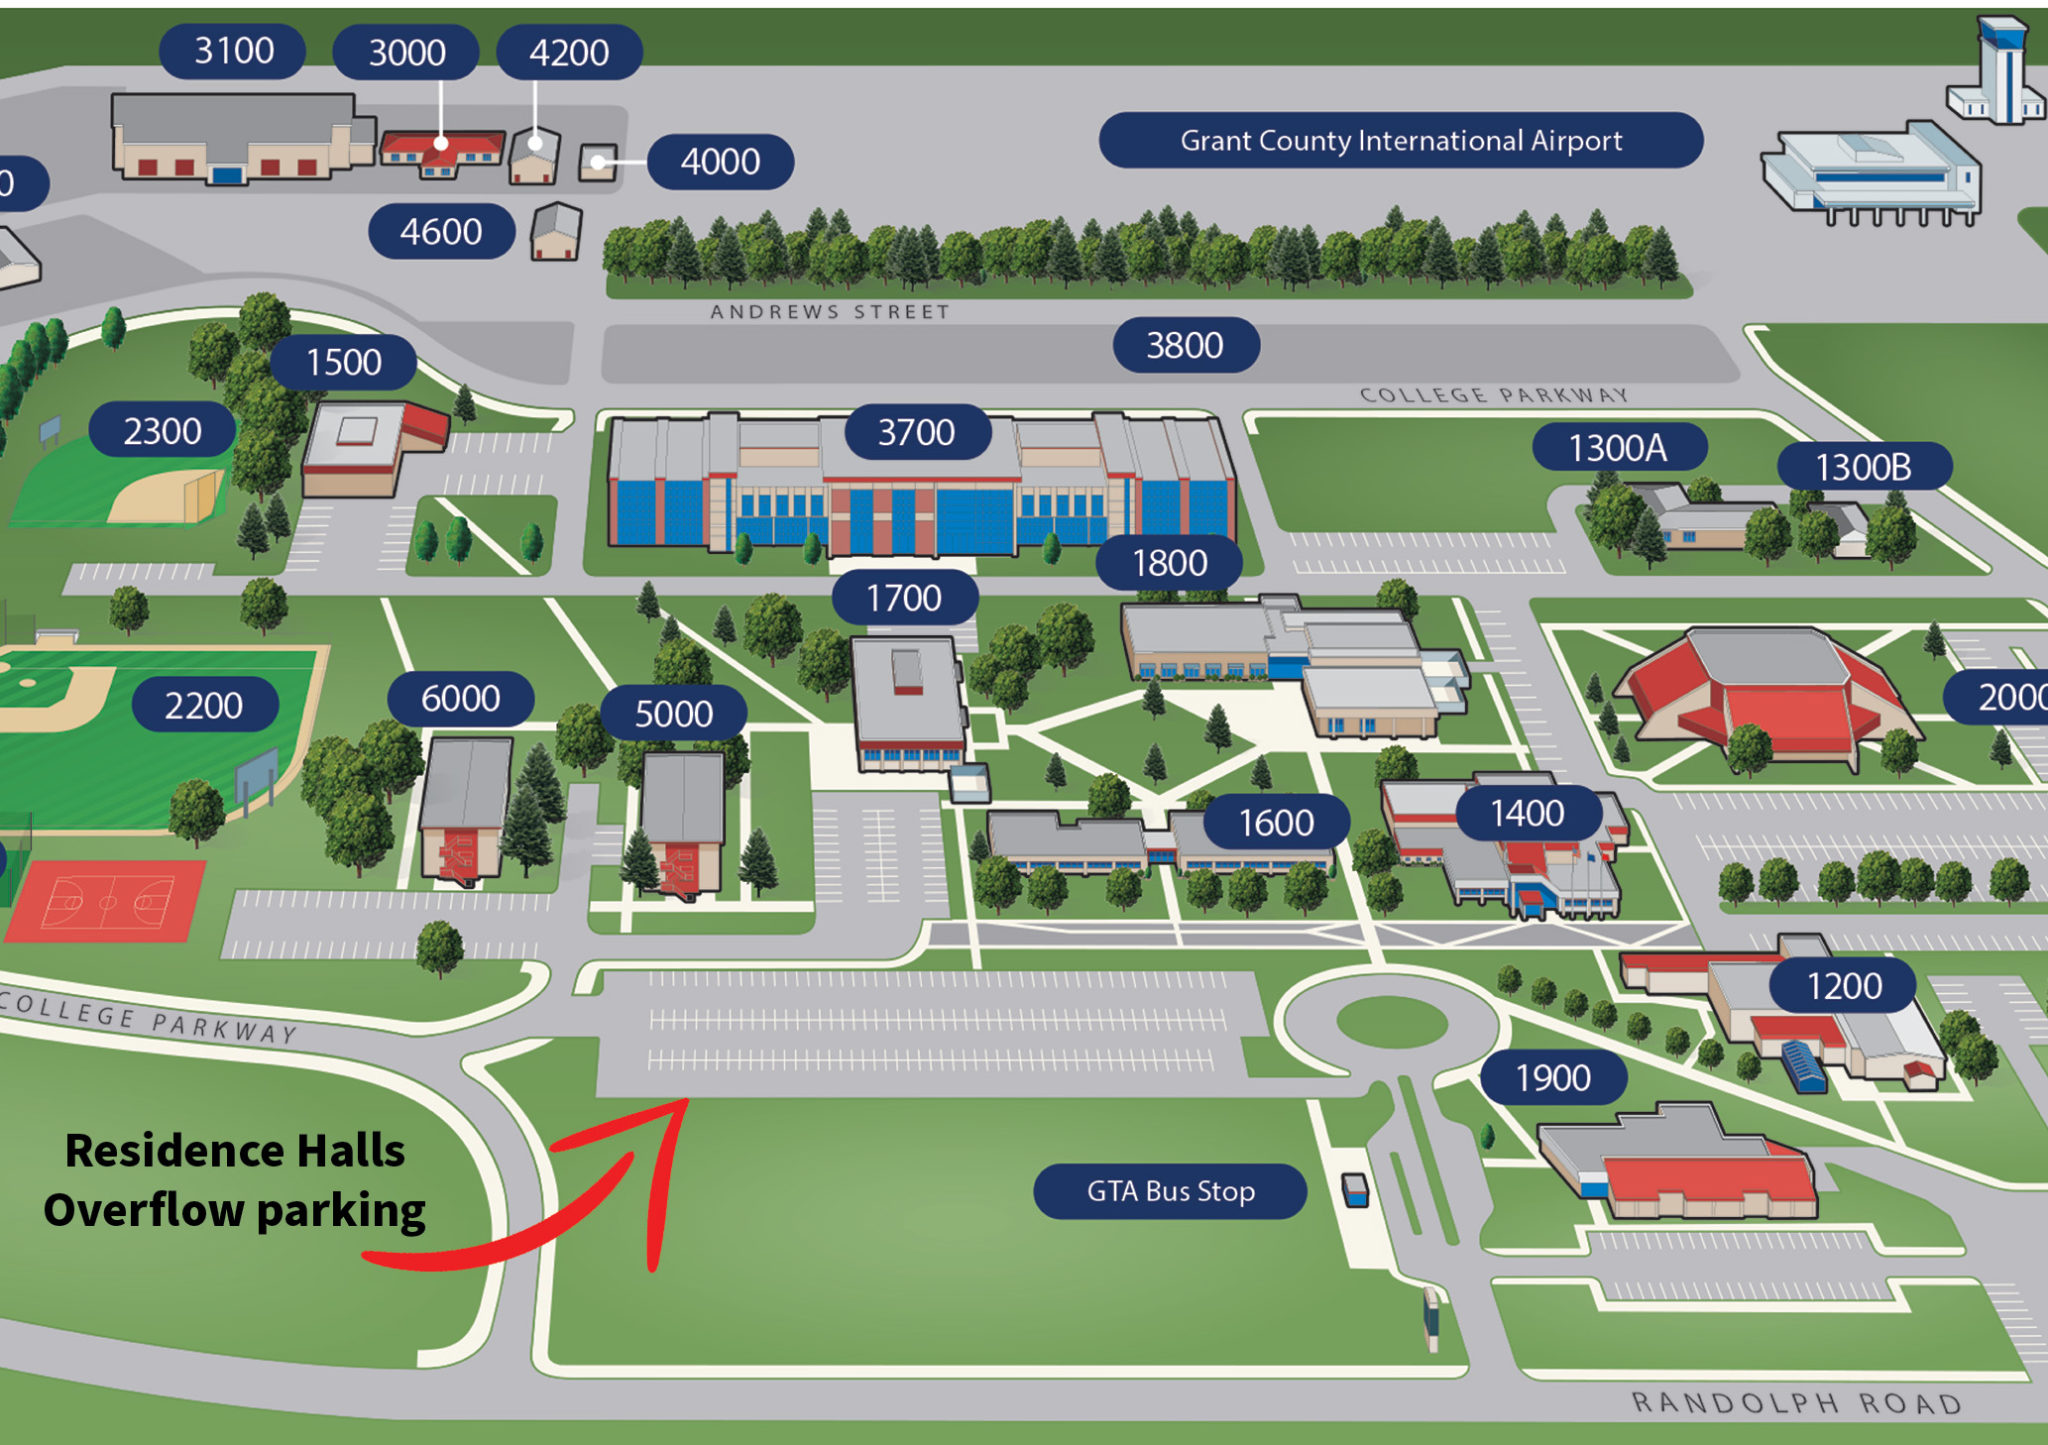 map of campus showing residence halls parking lot